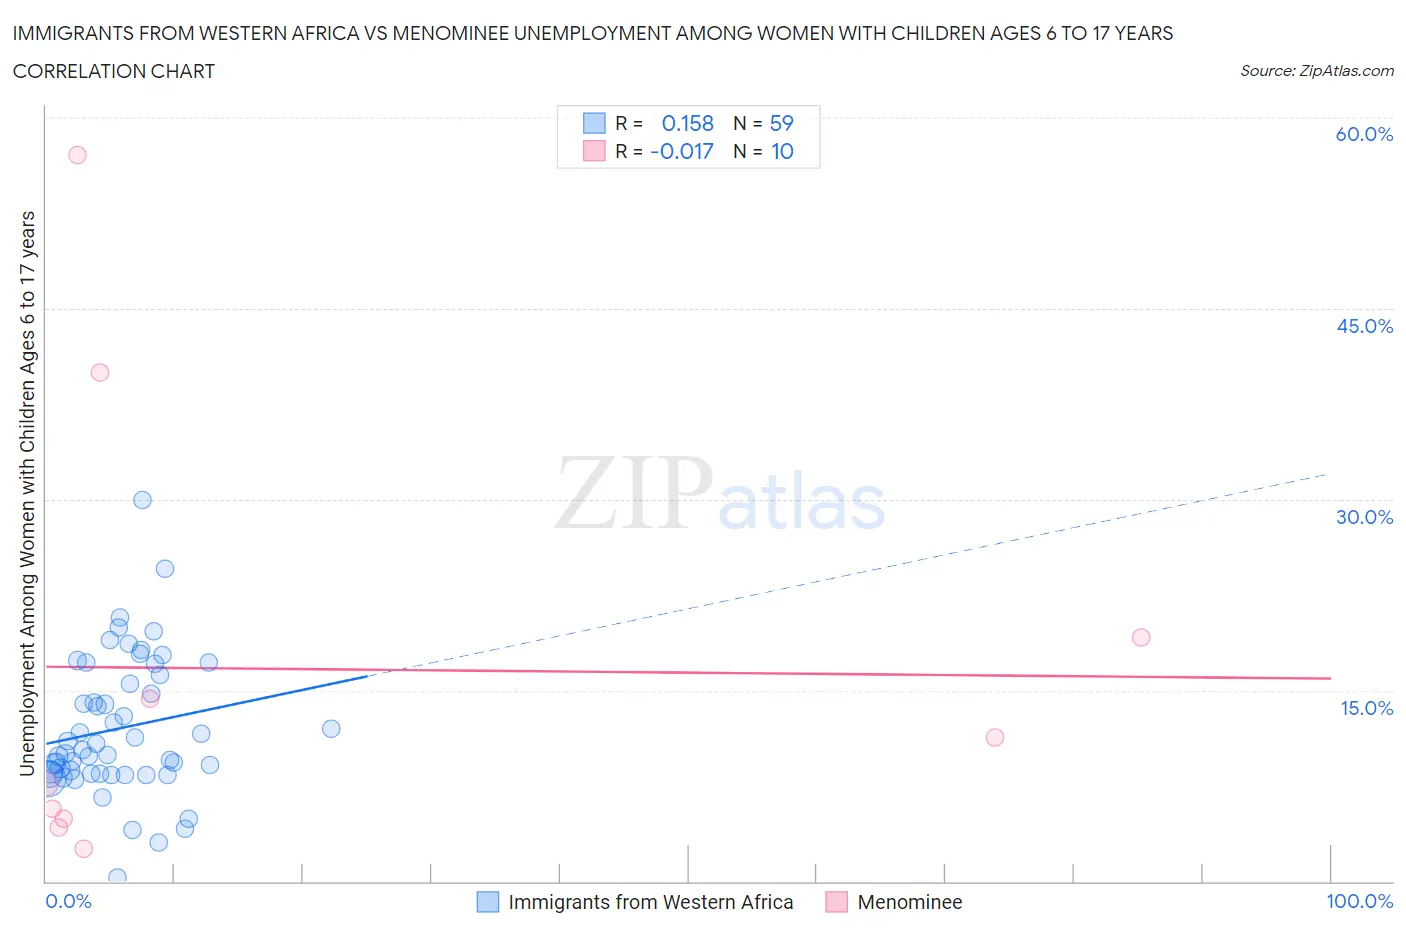 Immigrants from Western Africa vs Menominee Unemployment Among Women with Children Ages 6 to 17 years